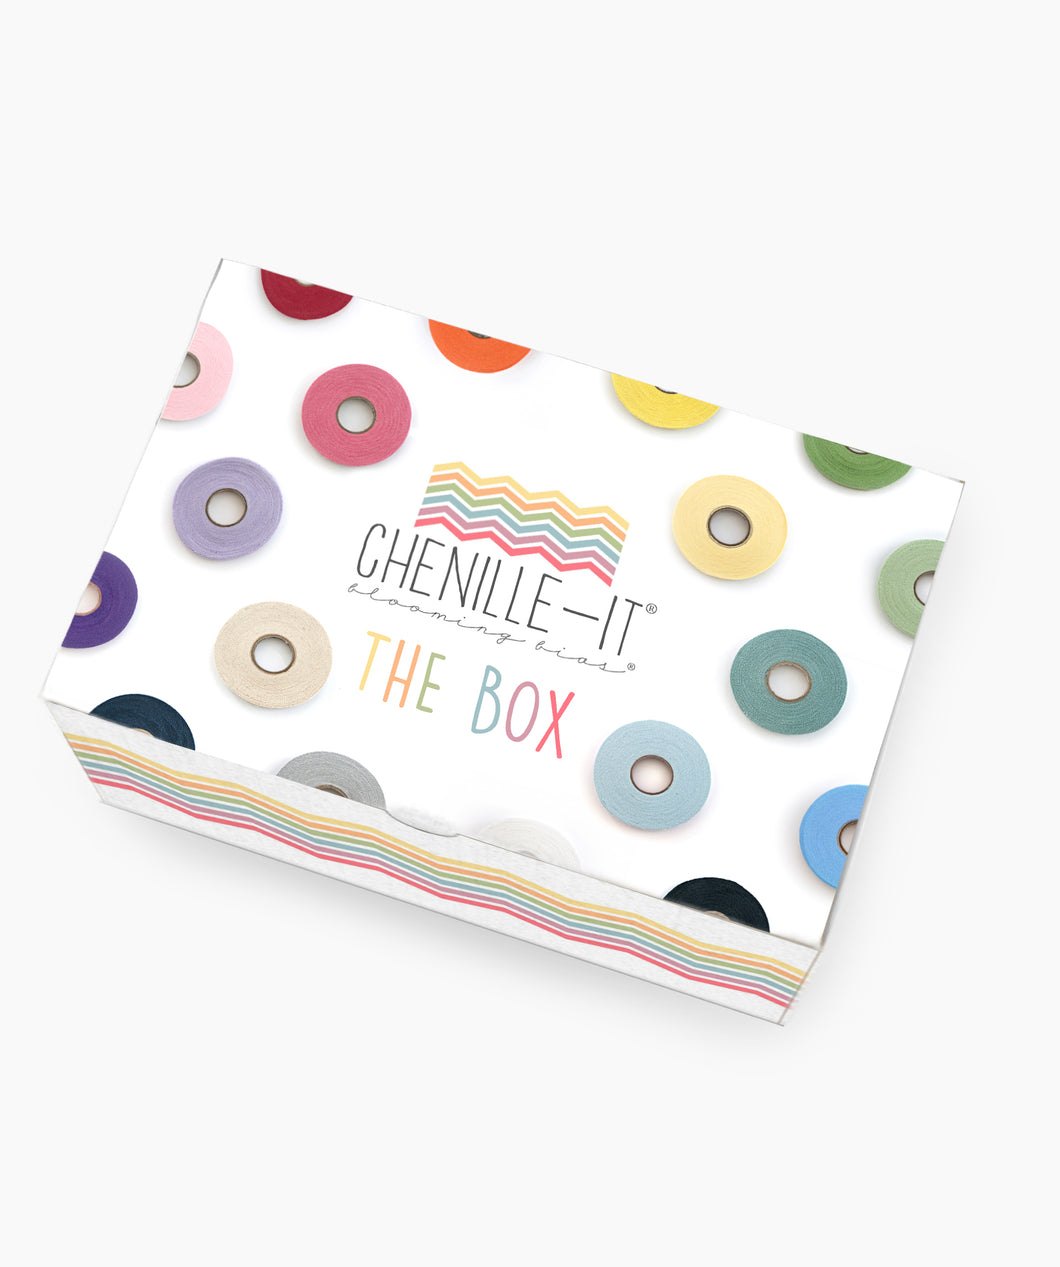 Chenille-It THE BOX (Monthly Subscription)